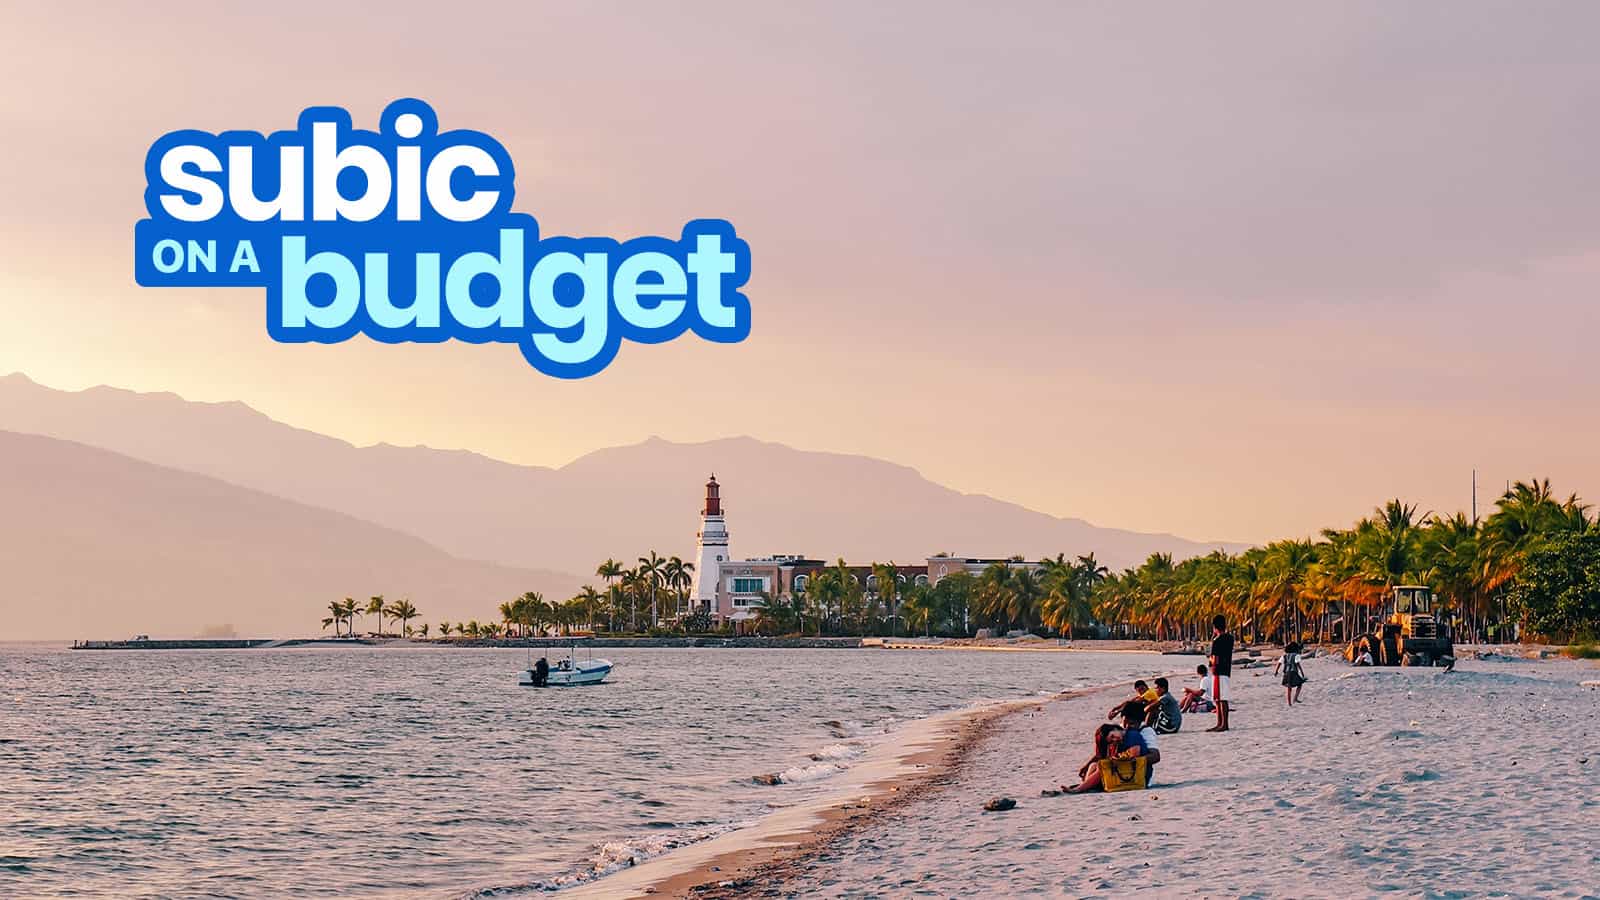 SUBIC TRAVEL GUIDE with Budget Itinerary